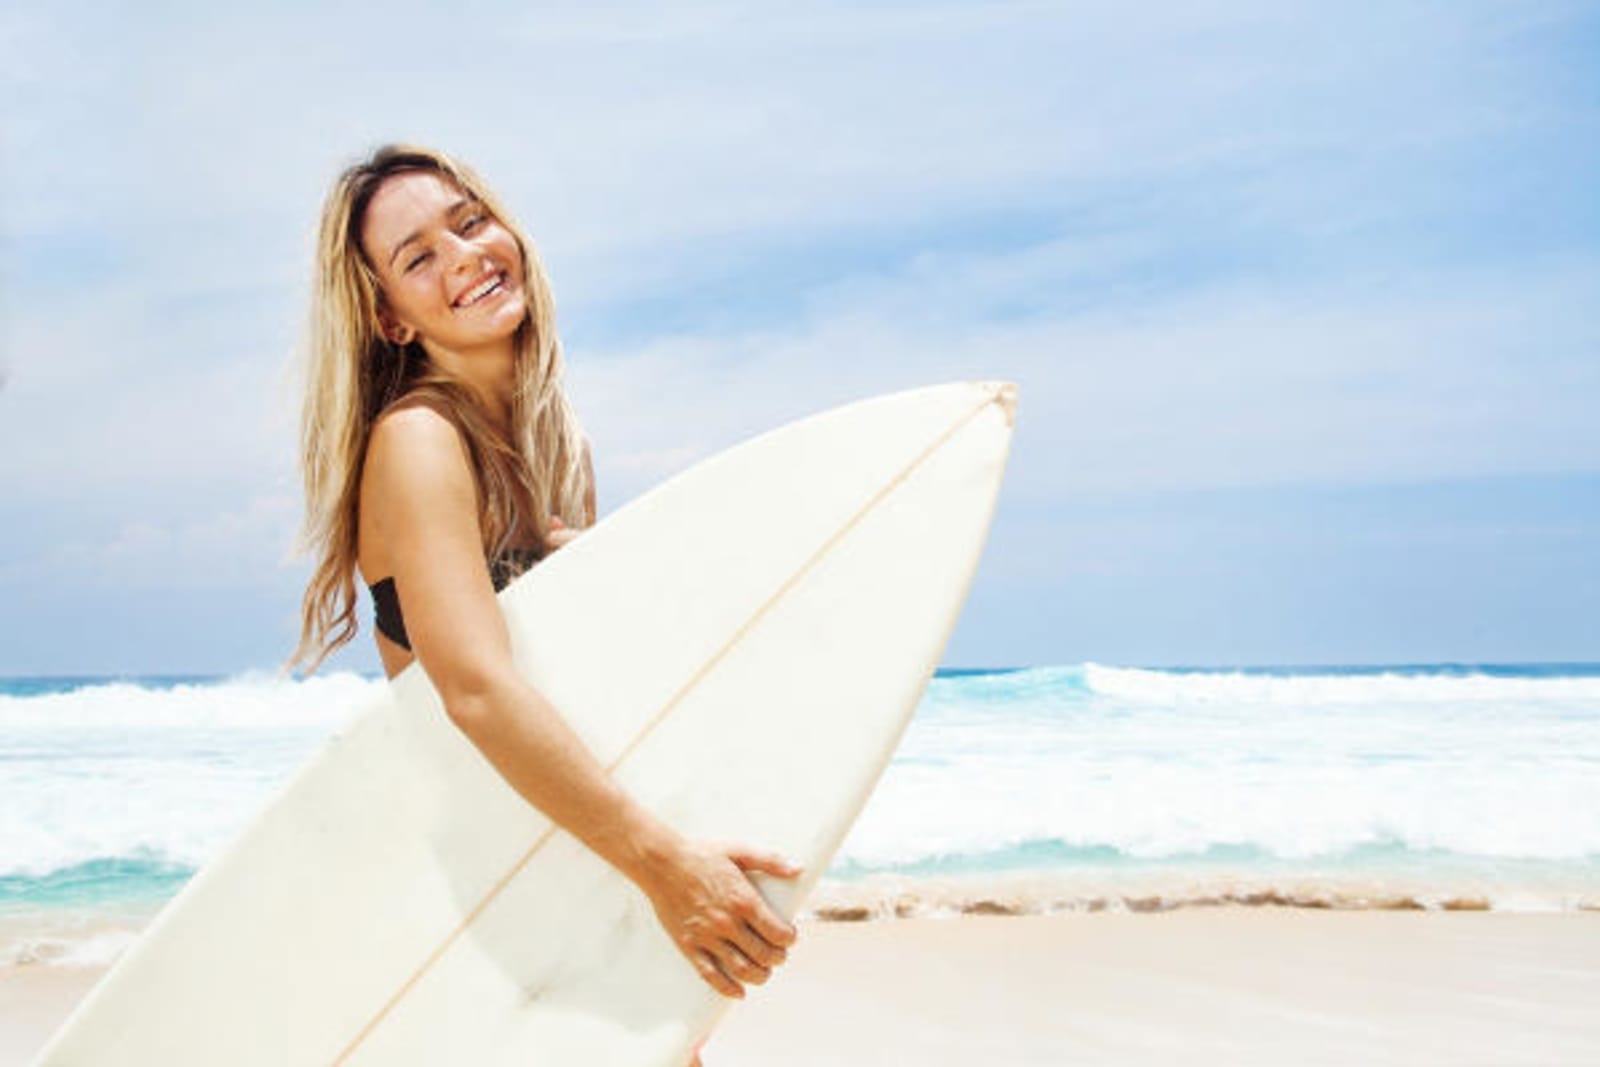 Woman smiling on a brightly lit beach, holding a white surfboard